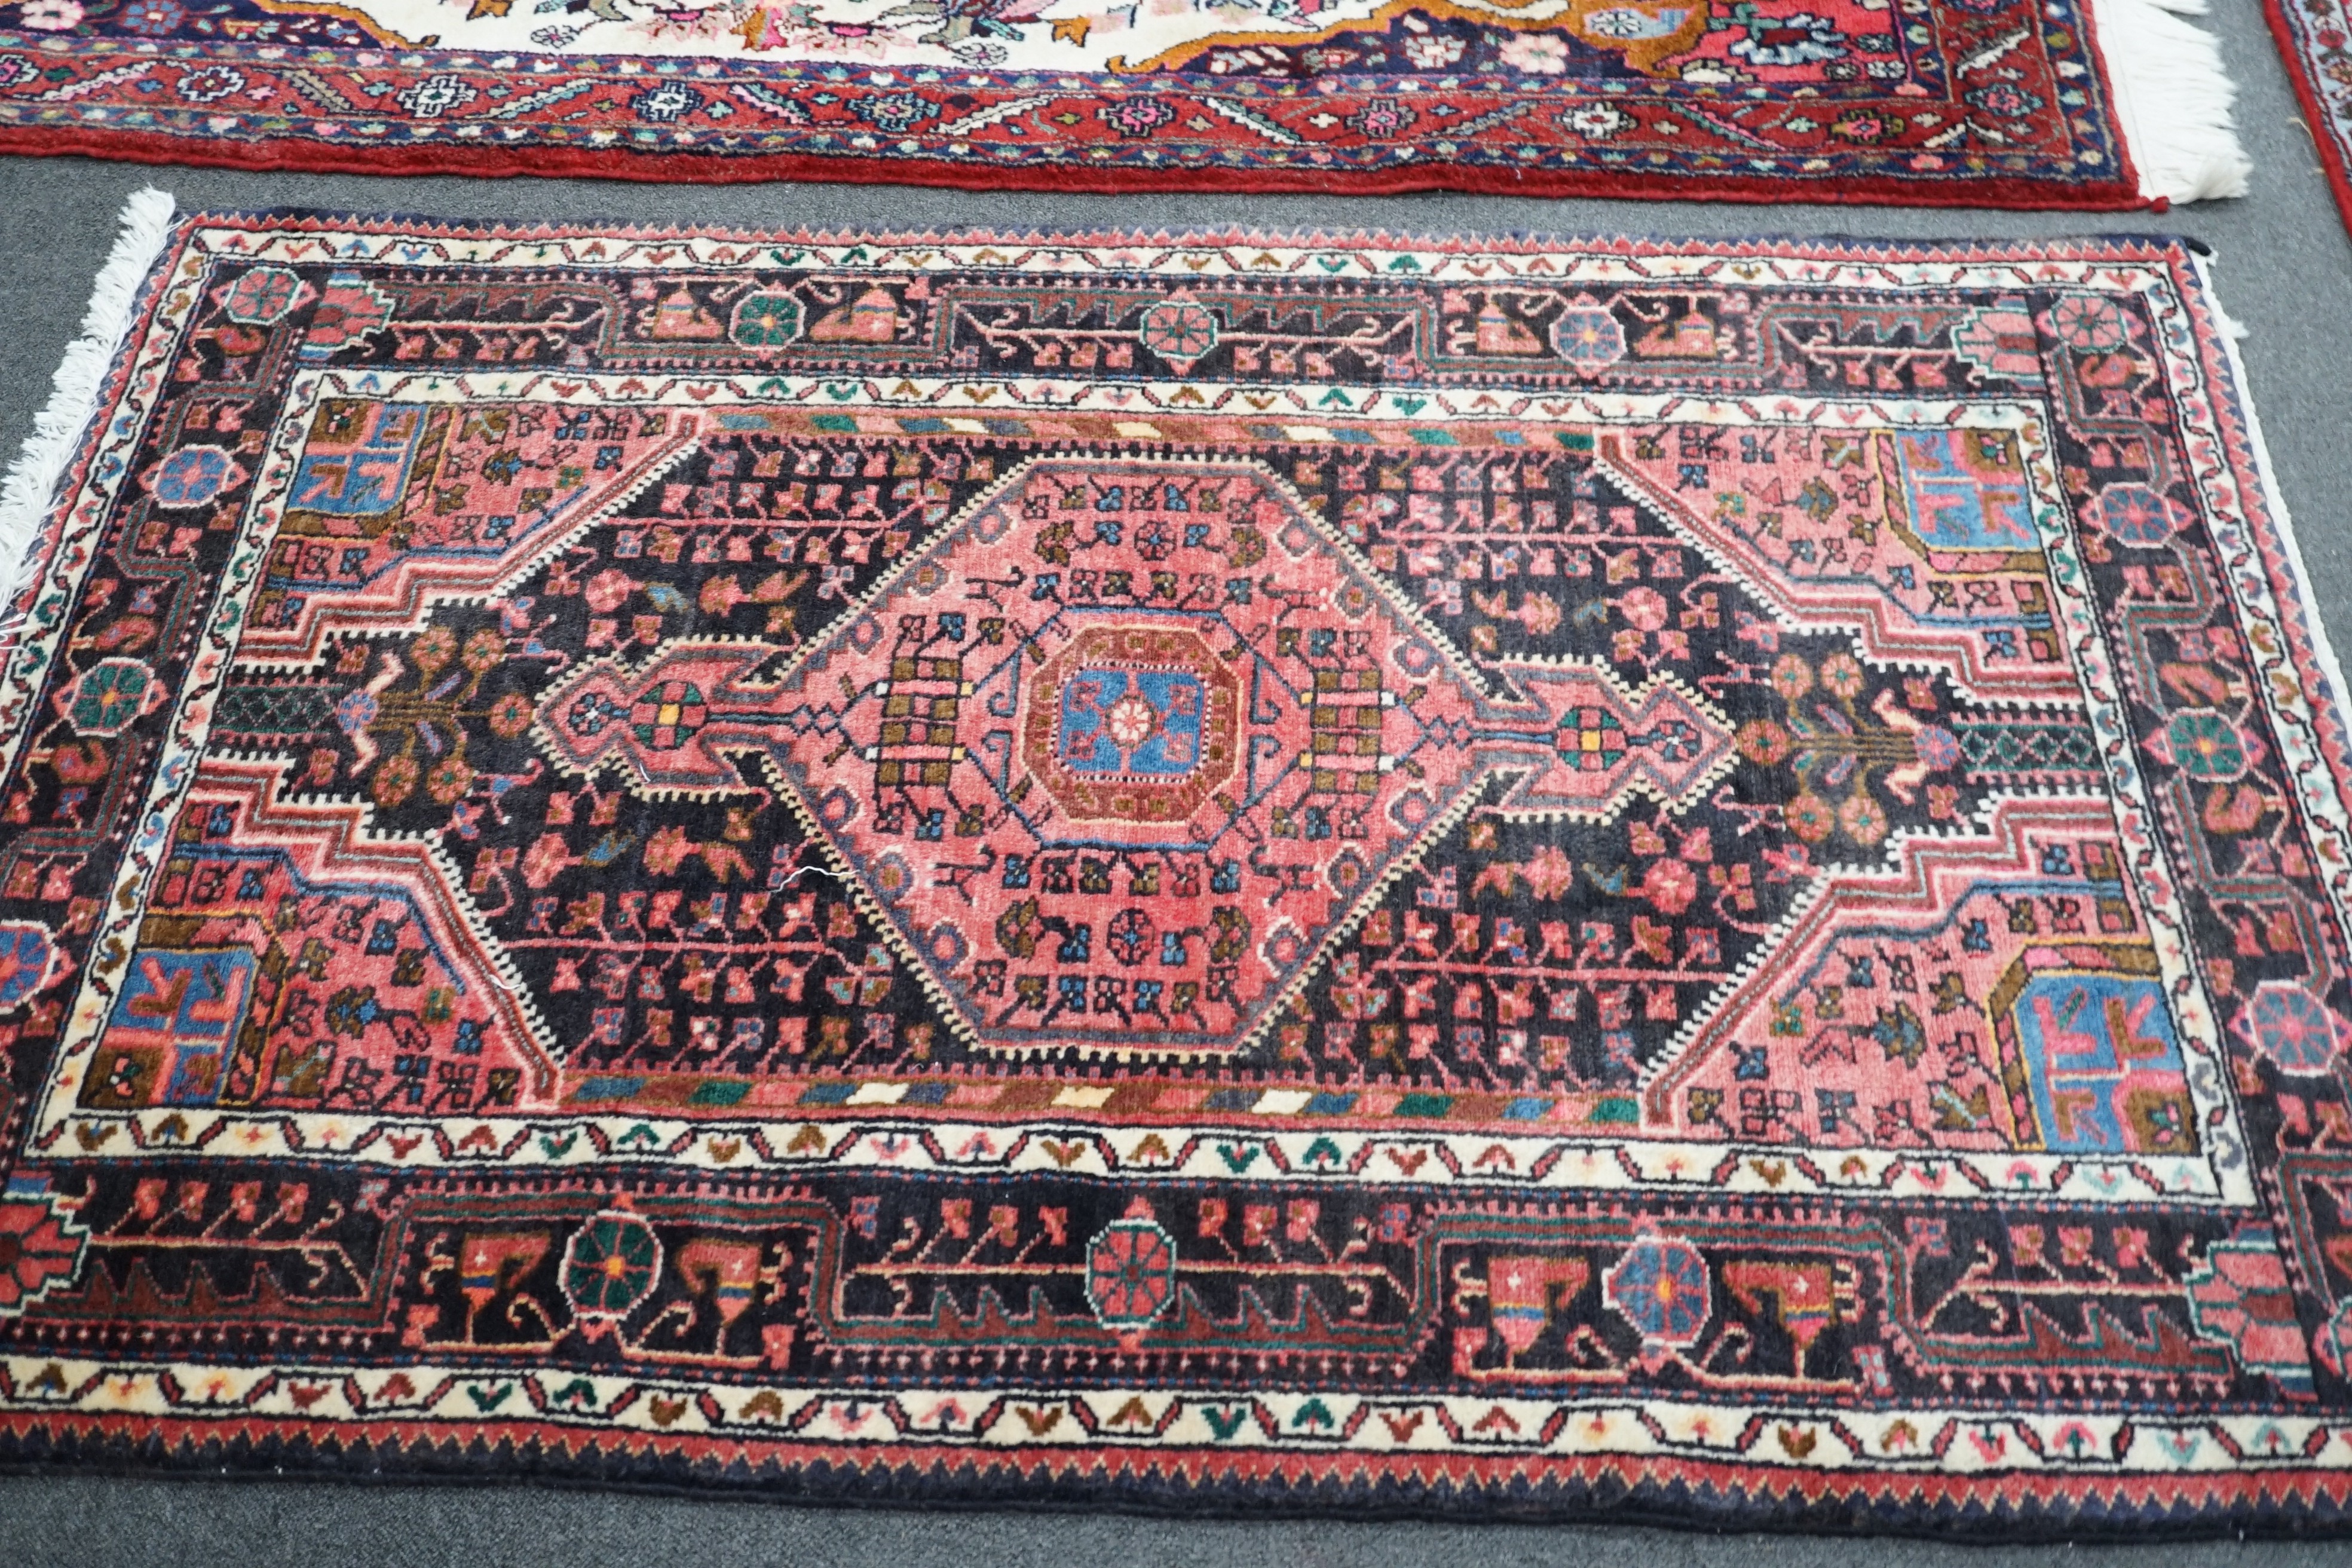 A North West Persian ivory ground rug, 220 x 140cm, and a smaller blue ground rug